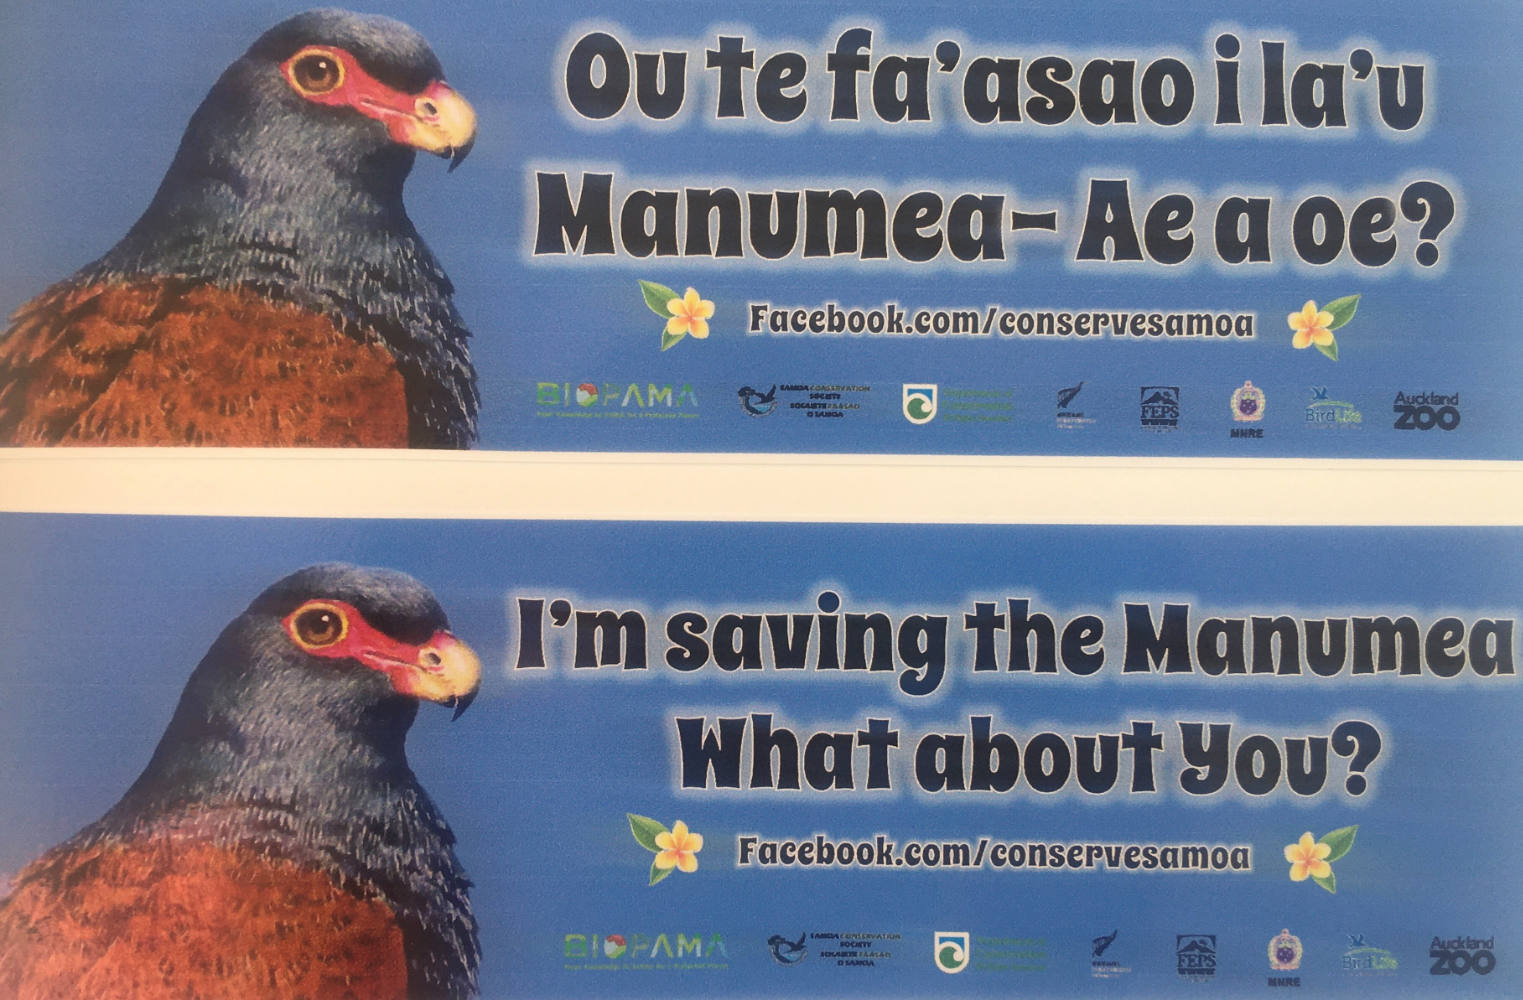 Image: On the left hand side of the image, in front of a blue background, a bird looks at the viewer. It is only shown from the chest up, with it's light brown wings on blue feathers. The beak is beant and yellow and the eyes are framed with red. Next to the bird, a slogan sais "Ou te fa'asao i la'u Manumea-Ae a oe?", below that a link refers to "Facebook.com/conservesamoa". This whole image is copied again below, this time with English translation: "I'm saving the Manumea - What about you?"